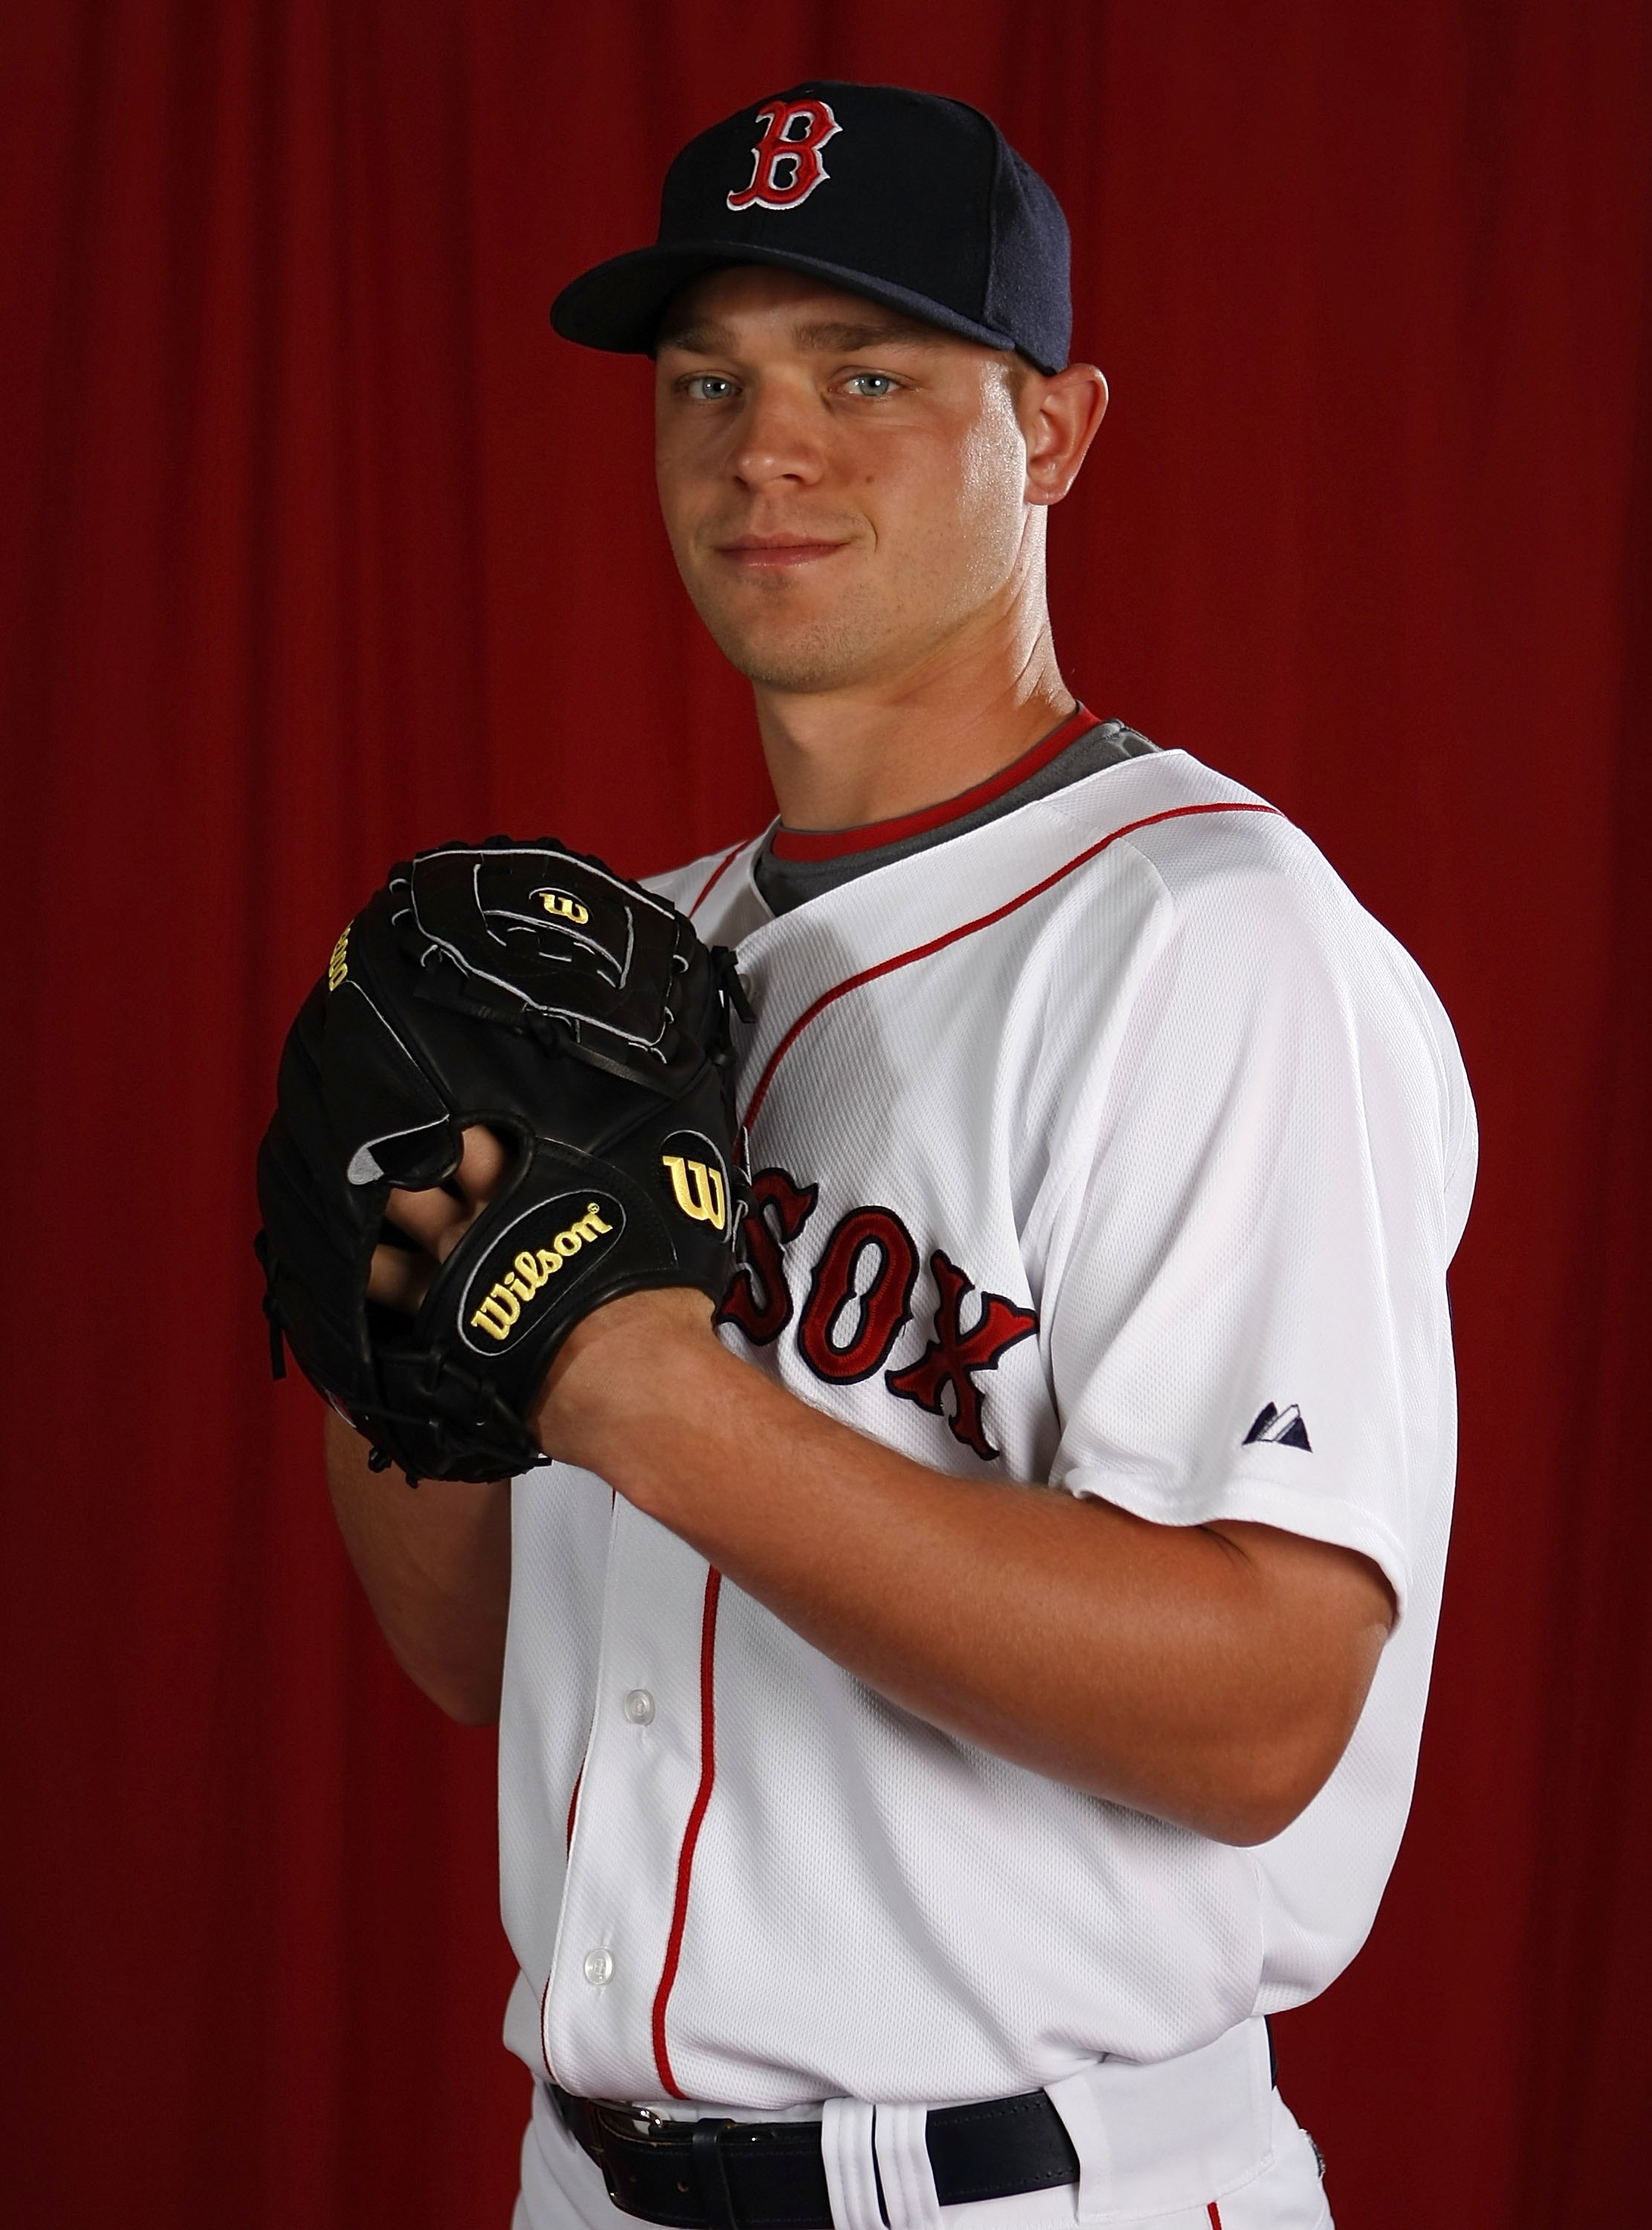 FT. MYERS, FL - FEBRUARY 28:  Michael Bowden #64 of the Boston Red Sox poses during photo day at the Boston Red Sox Spring Training practice facility on February 28, 2010 in Ft. Myers, Florida.  (Photo by Gregory Shamus/Getty Images)